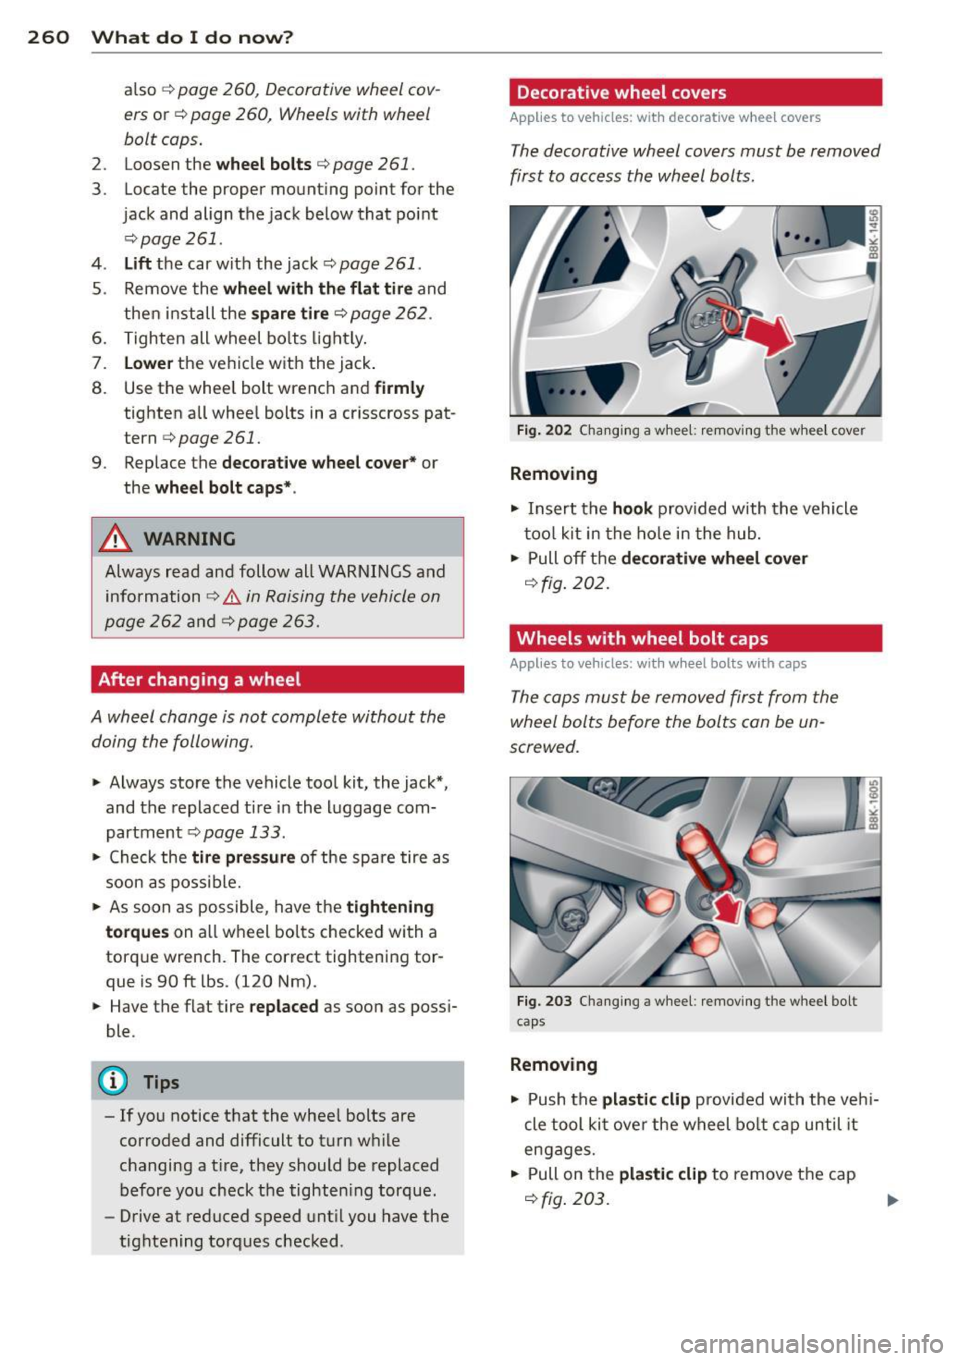 AUDI A4 2013 Manual PDF 260  What  do  I  do  now ? 
also c:> page 2 60 , Decorative  wheel  cov­
ers 
or c:> page 260, Wheels  with  wheel 
bolt  caps. 
2 .  Loosen  the wheel  b olts c:> page  261. 
3 .  Locate  the  prop